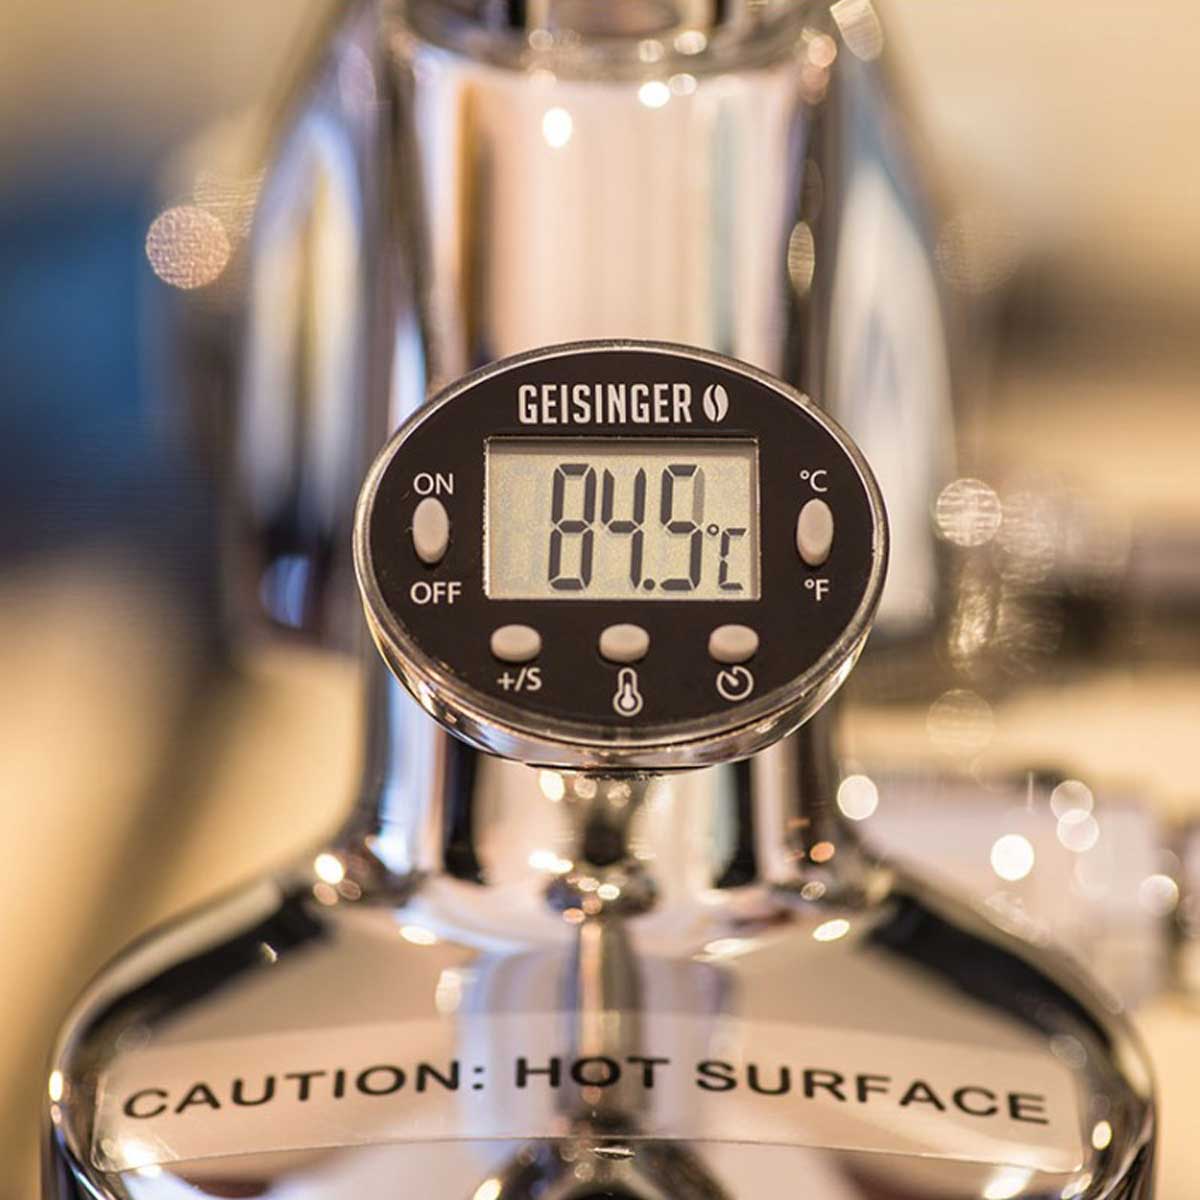 E61 Shot timer with precise thermometer, encasement polished stainless steel